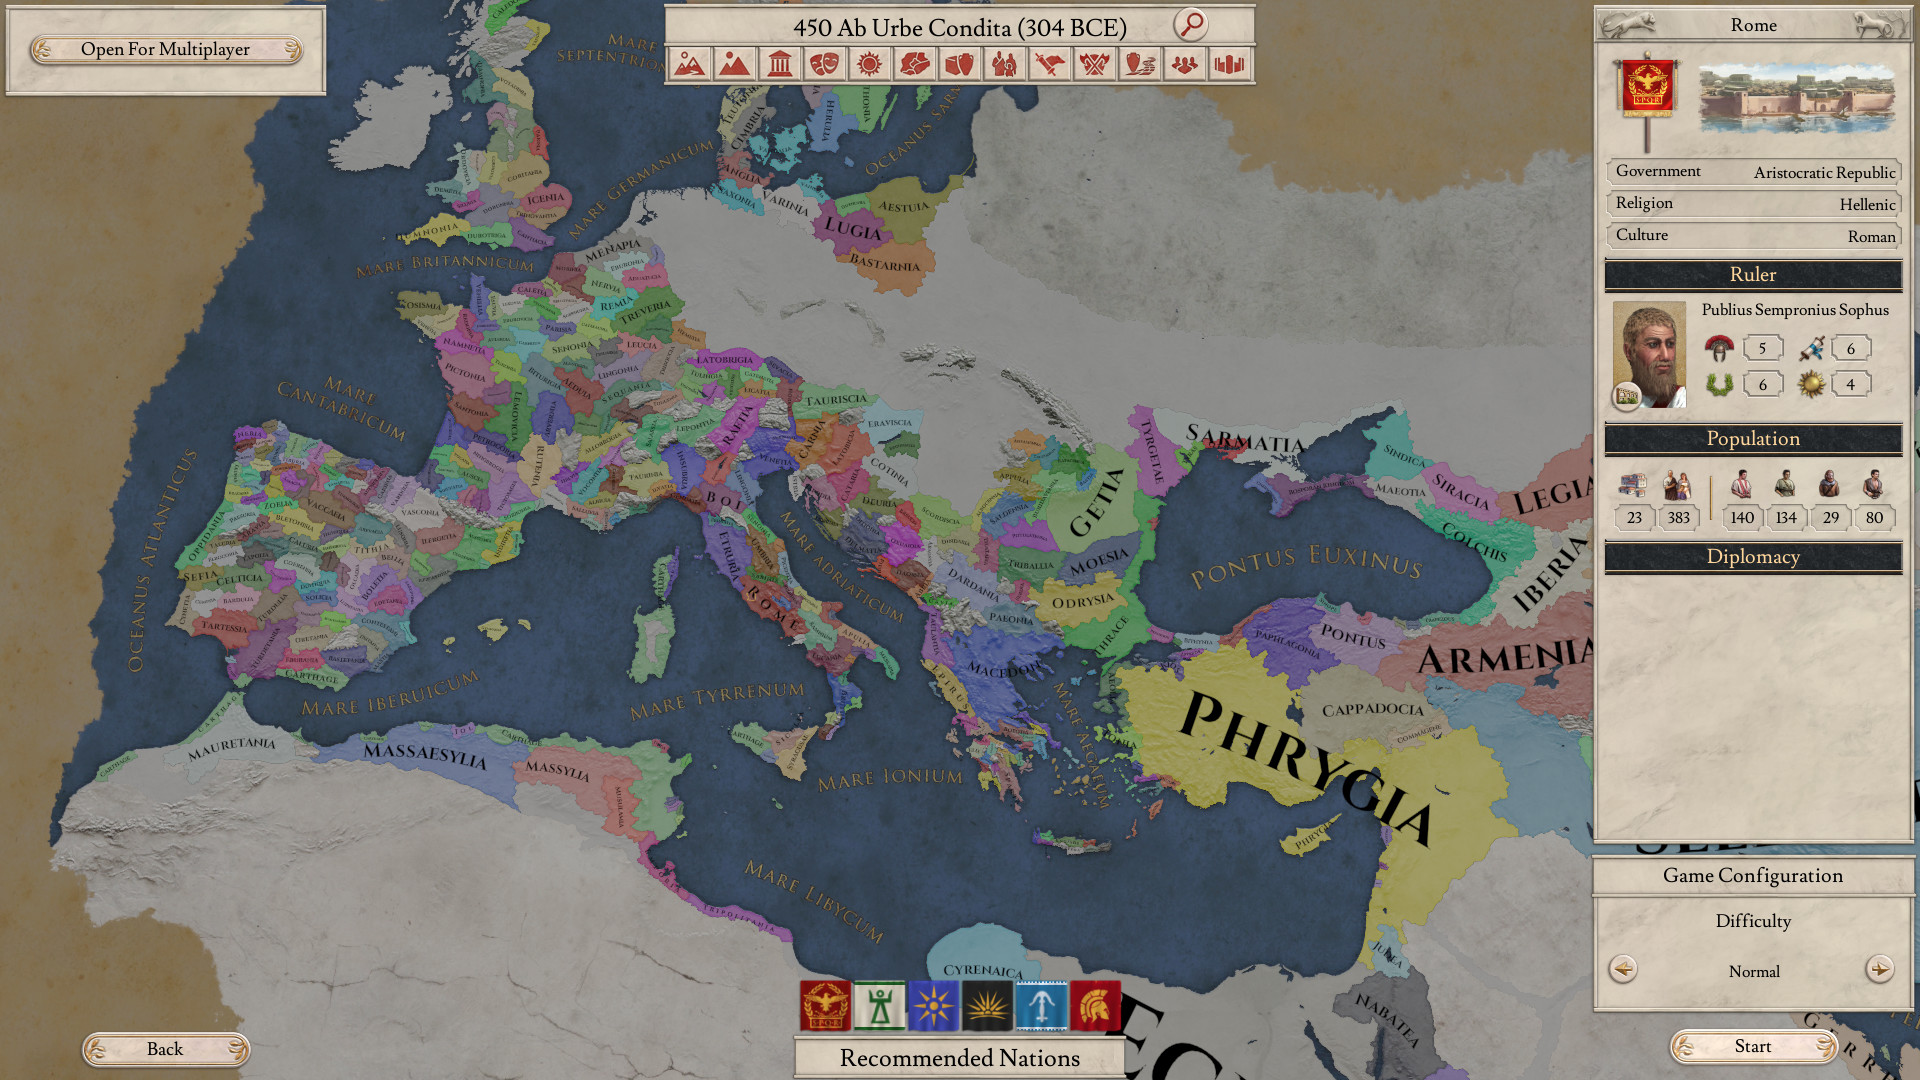 Mediterranean Oyster: The world of Classical antiquity is your oyster in Imperator: Rome.